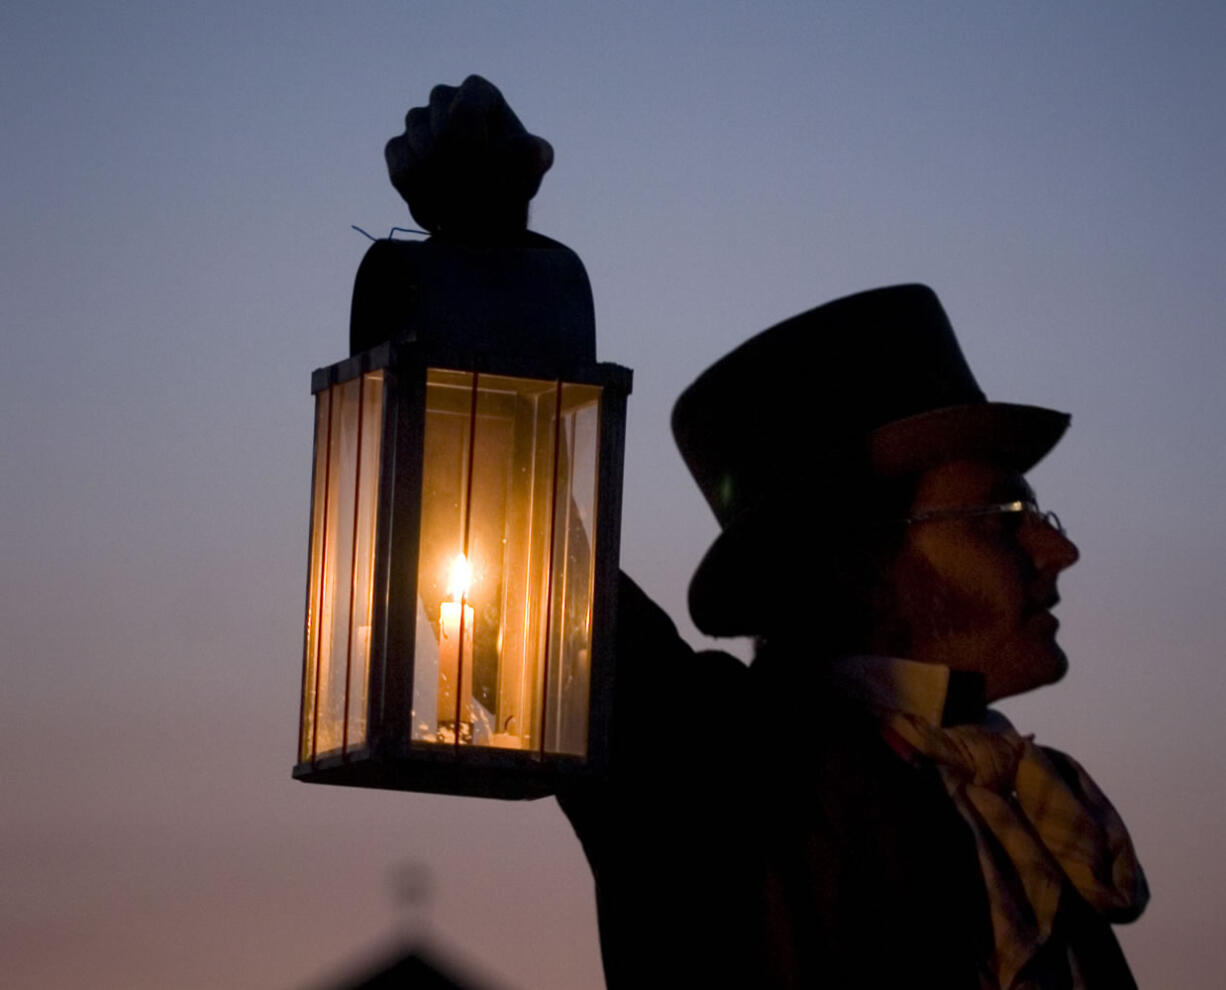 Dressed in period garb, Greg Shine, chief ranger and historian at Fort Vancouver, holds a lantern during a candlelight tour.